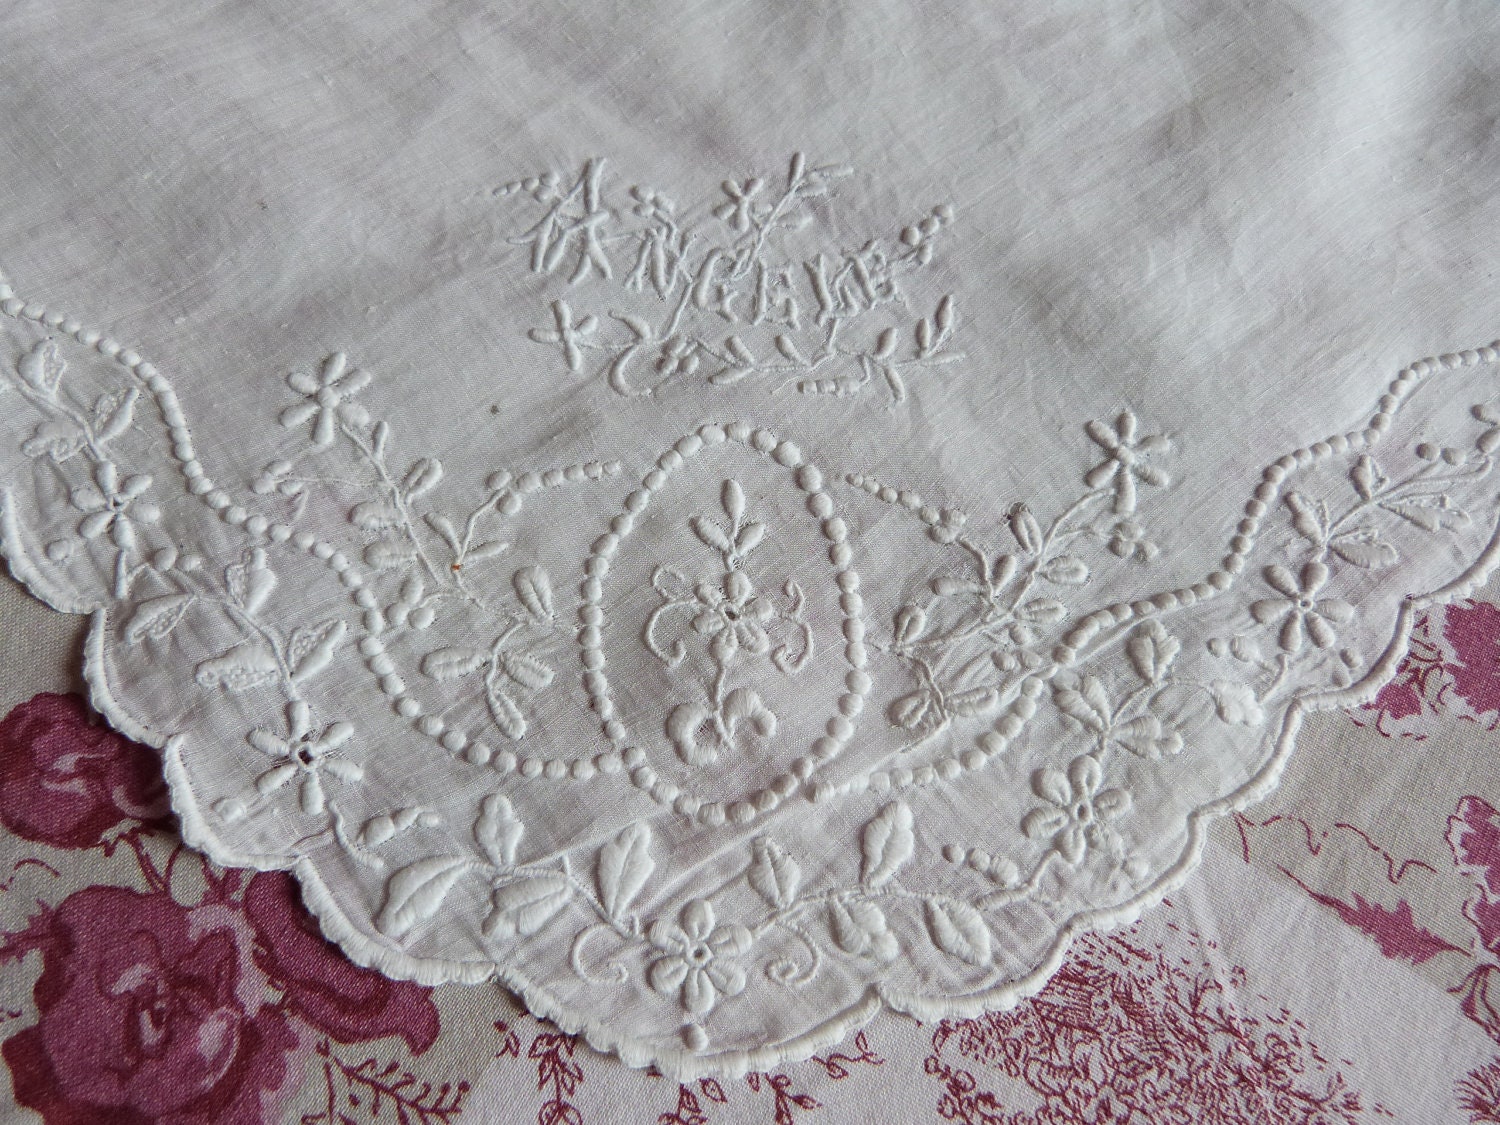 Antique French Victorian heirloom handkerchief, 1900s hand embroidered hanky w name embroidery, hand kerchief, romantic - MyFrenchAntiqueShop